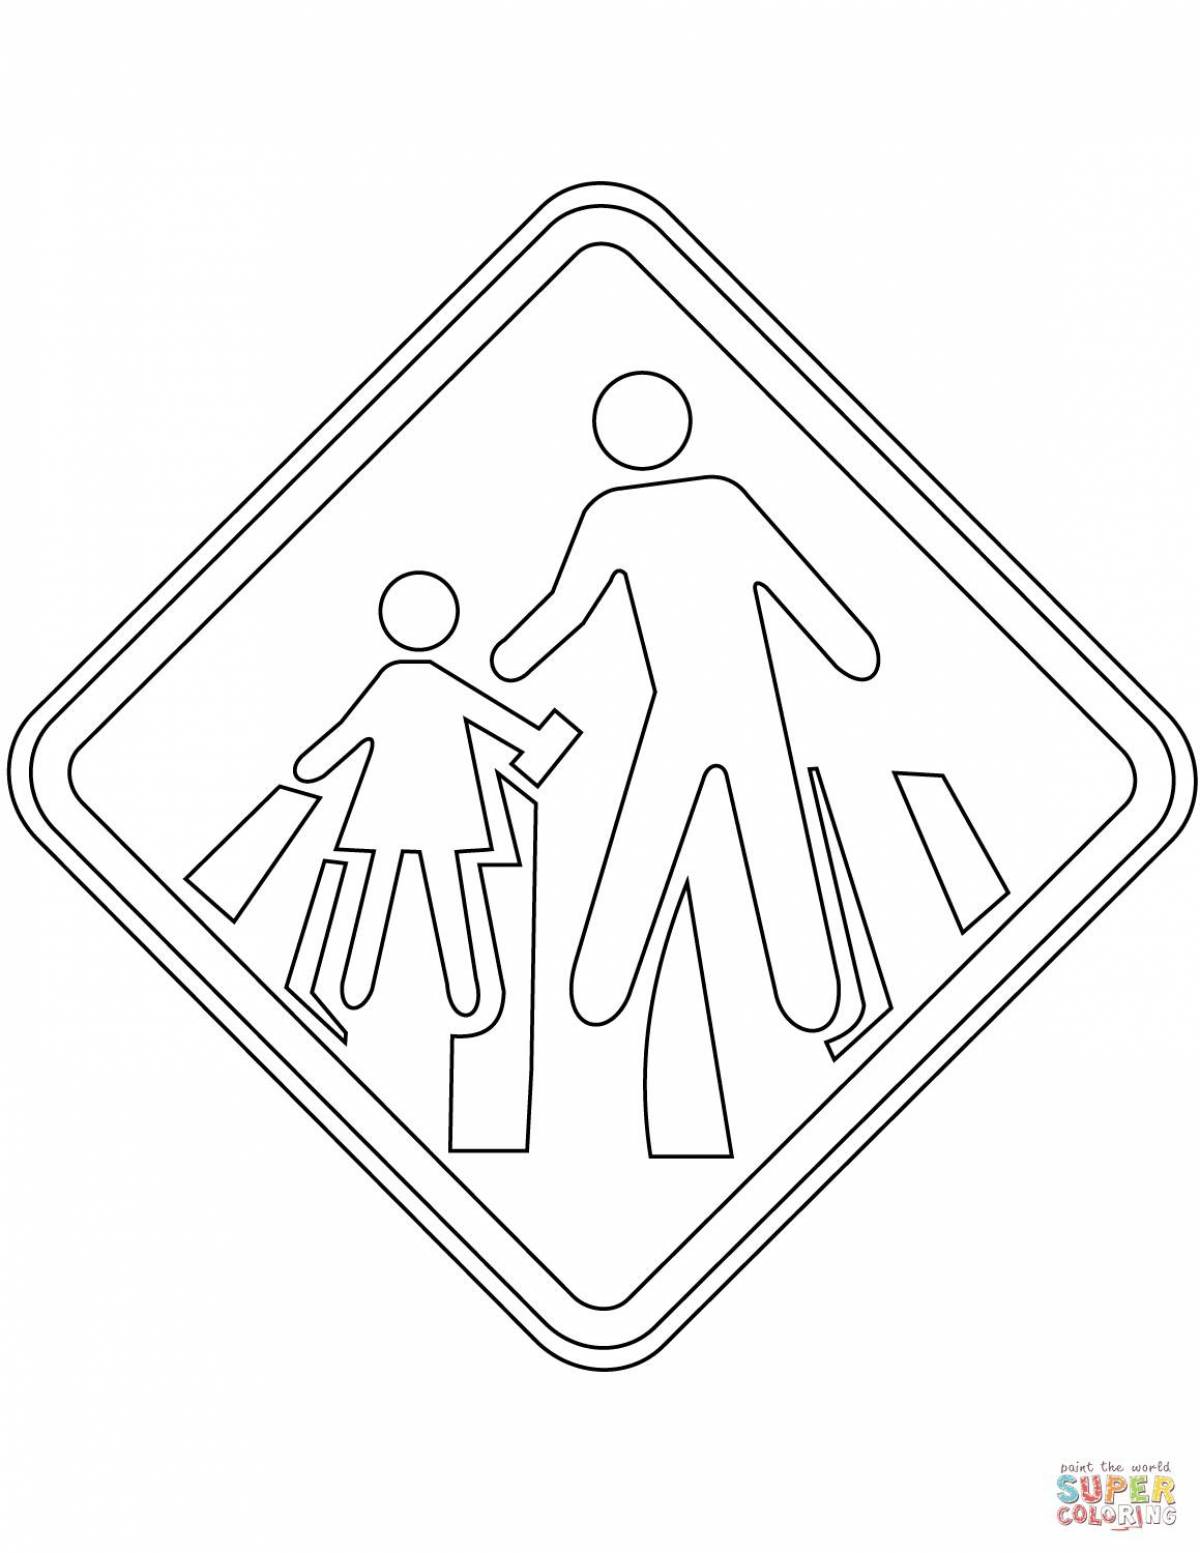 Crossing sign #4